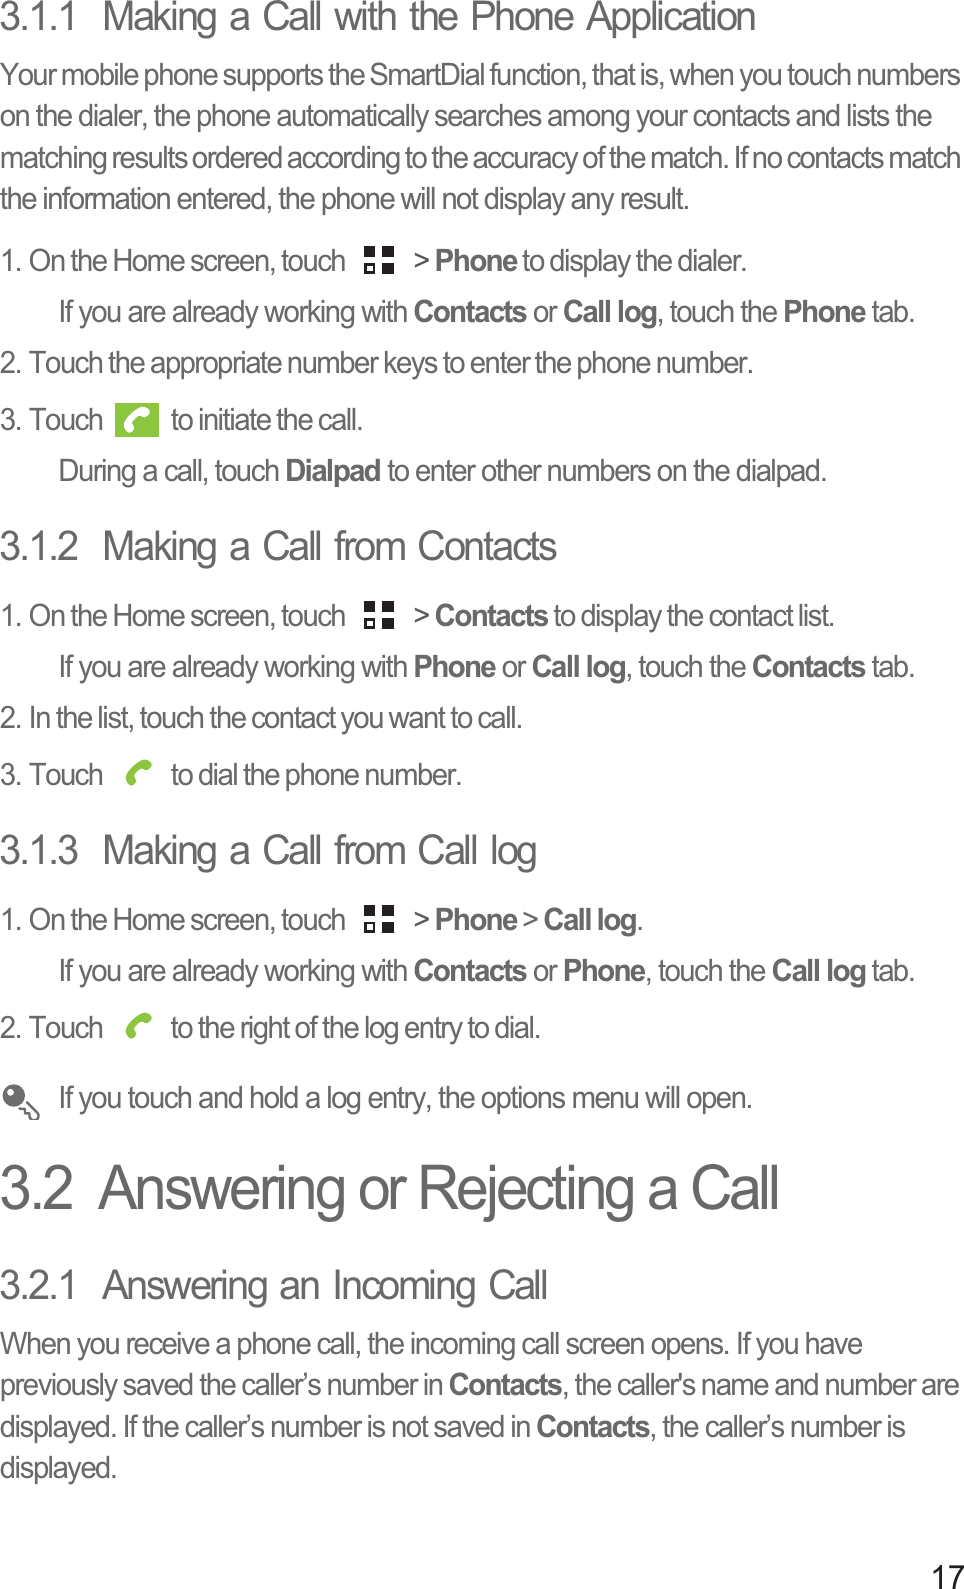 173.1.1  Making a Call with the Phone ApplicationYour mobile phone supports the SmartDial function, that is, when you touch numbers on the dialer, the phone automatically searches among your contacts and lists the matching results ordered according to the accuracy of the match. If no contacts match the information entered, the phone will not display any result.1. On the Home screen, touch   &gt; Phone to display the dialer.If you are already working with Contacts or Call log, touch the Phone tab.2. Touch the appropriate number keys to enter the phone number.3. Touch   to initiate the call.During a call, touch Dialpad to enter other numbers on the dialpad.3.1.2  Making a Call from Contacts1. On the Home screen, touch   &gt; Contacts to display the contact list.If you are already working with Phone or Call log, touch the Contacts tab.2. In the list, touch the contact you want to call.3. Touch   to dial the phone number.3.1.3  Making a Call from Call log1. On the Home screen, touch   &gt; Phone&gt;Call log.If you are already working with Contacts or Phone, touch the Call log tab.2. Touch   to the right of the log entry to dial.If you touch and hold a log entry, the options menu will open.3.2  Answering or Rejecting a Call3.2.1  Answering an Incoming CallWhen you receive a phone call, the incoming call screen opens. If you have previously saved the caller’s number in Contacts, the caller&apos;s name and number are displayed. If the caller’s number is not saved in Contacts, the caller’s number is displayed.